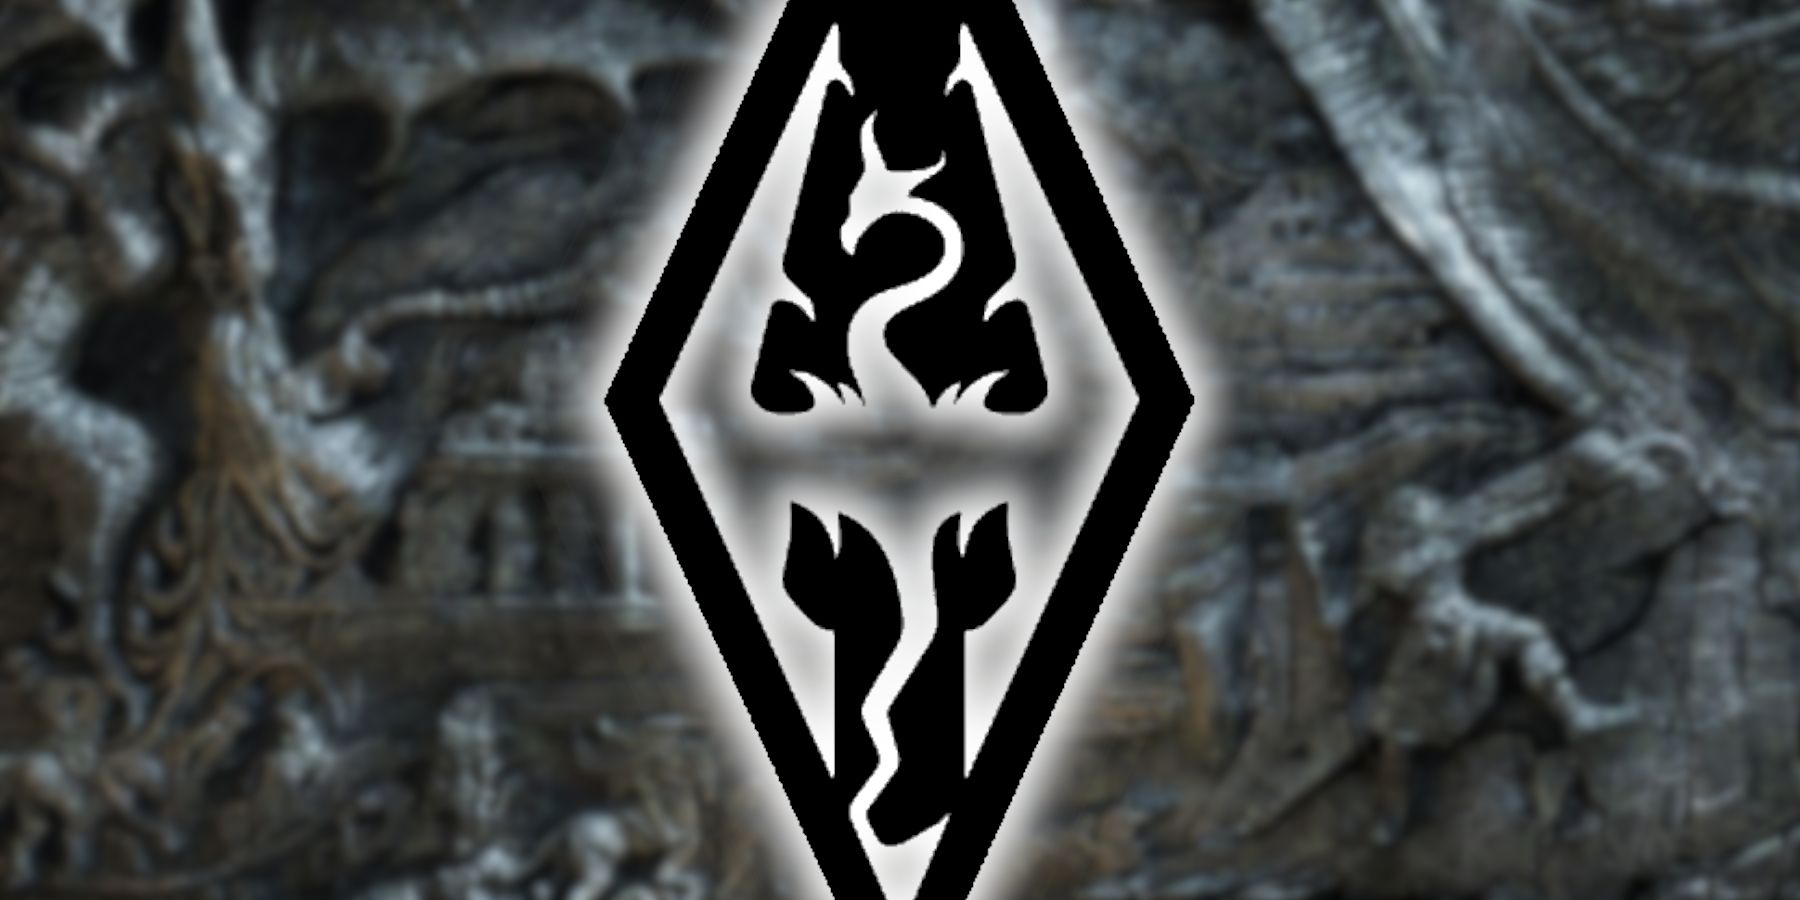 Image of the Skyrim logo in the middle with Alduin's Wall behind it.